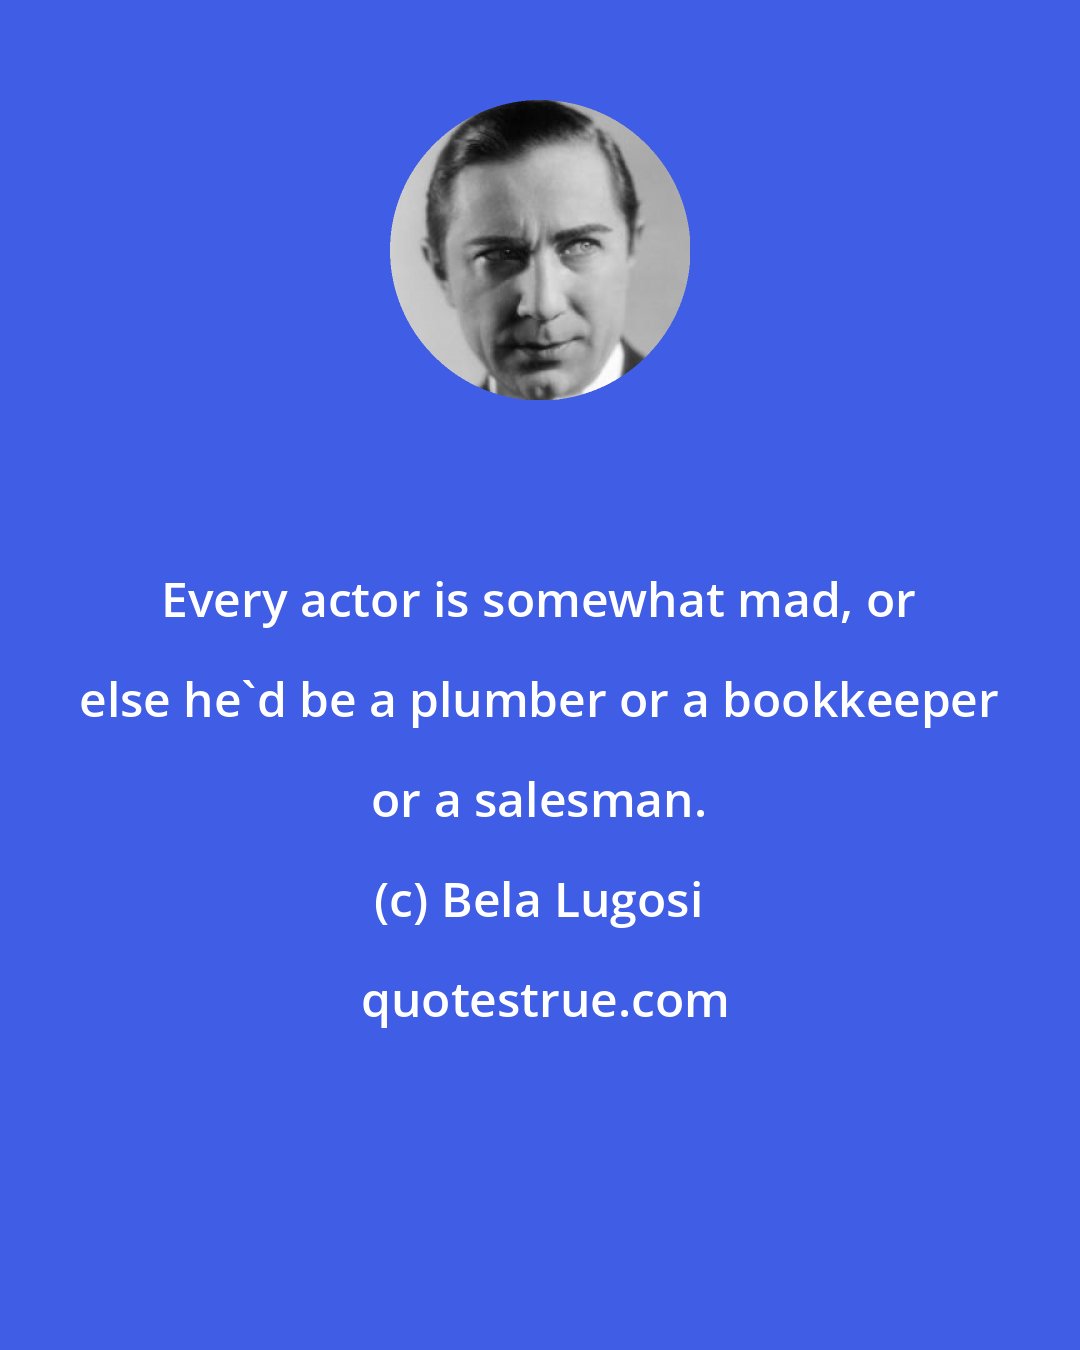 Bela Lugosi: Every actor is somewhat mad, or else he'd be a plumber or a bookkeeper or a salesman.